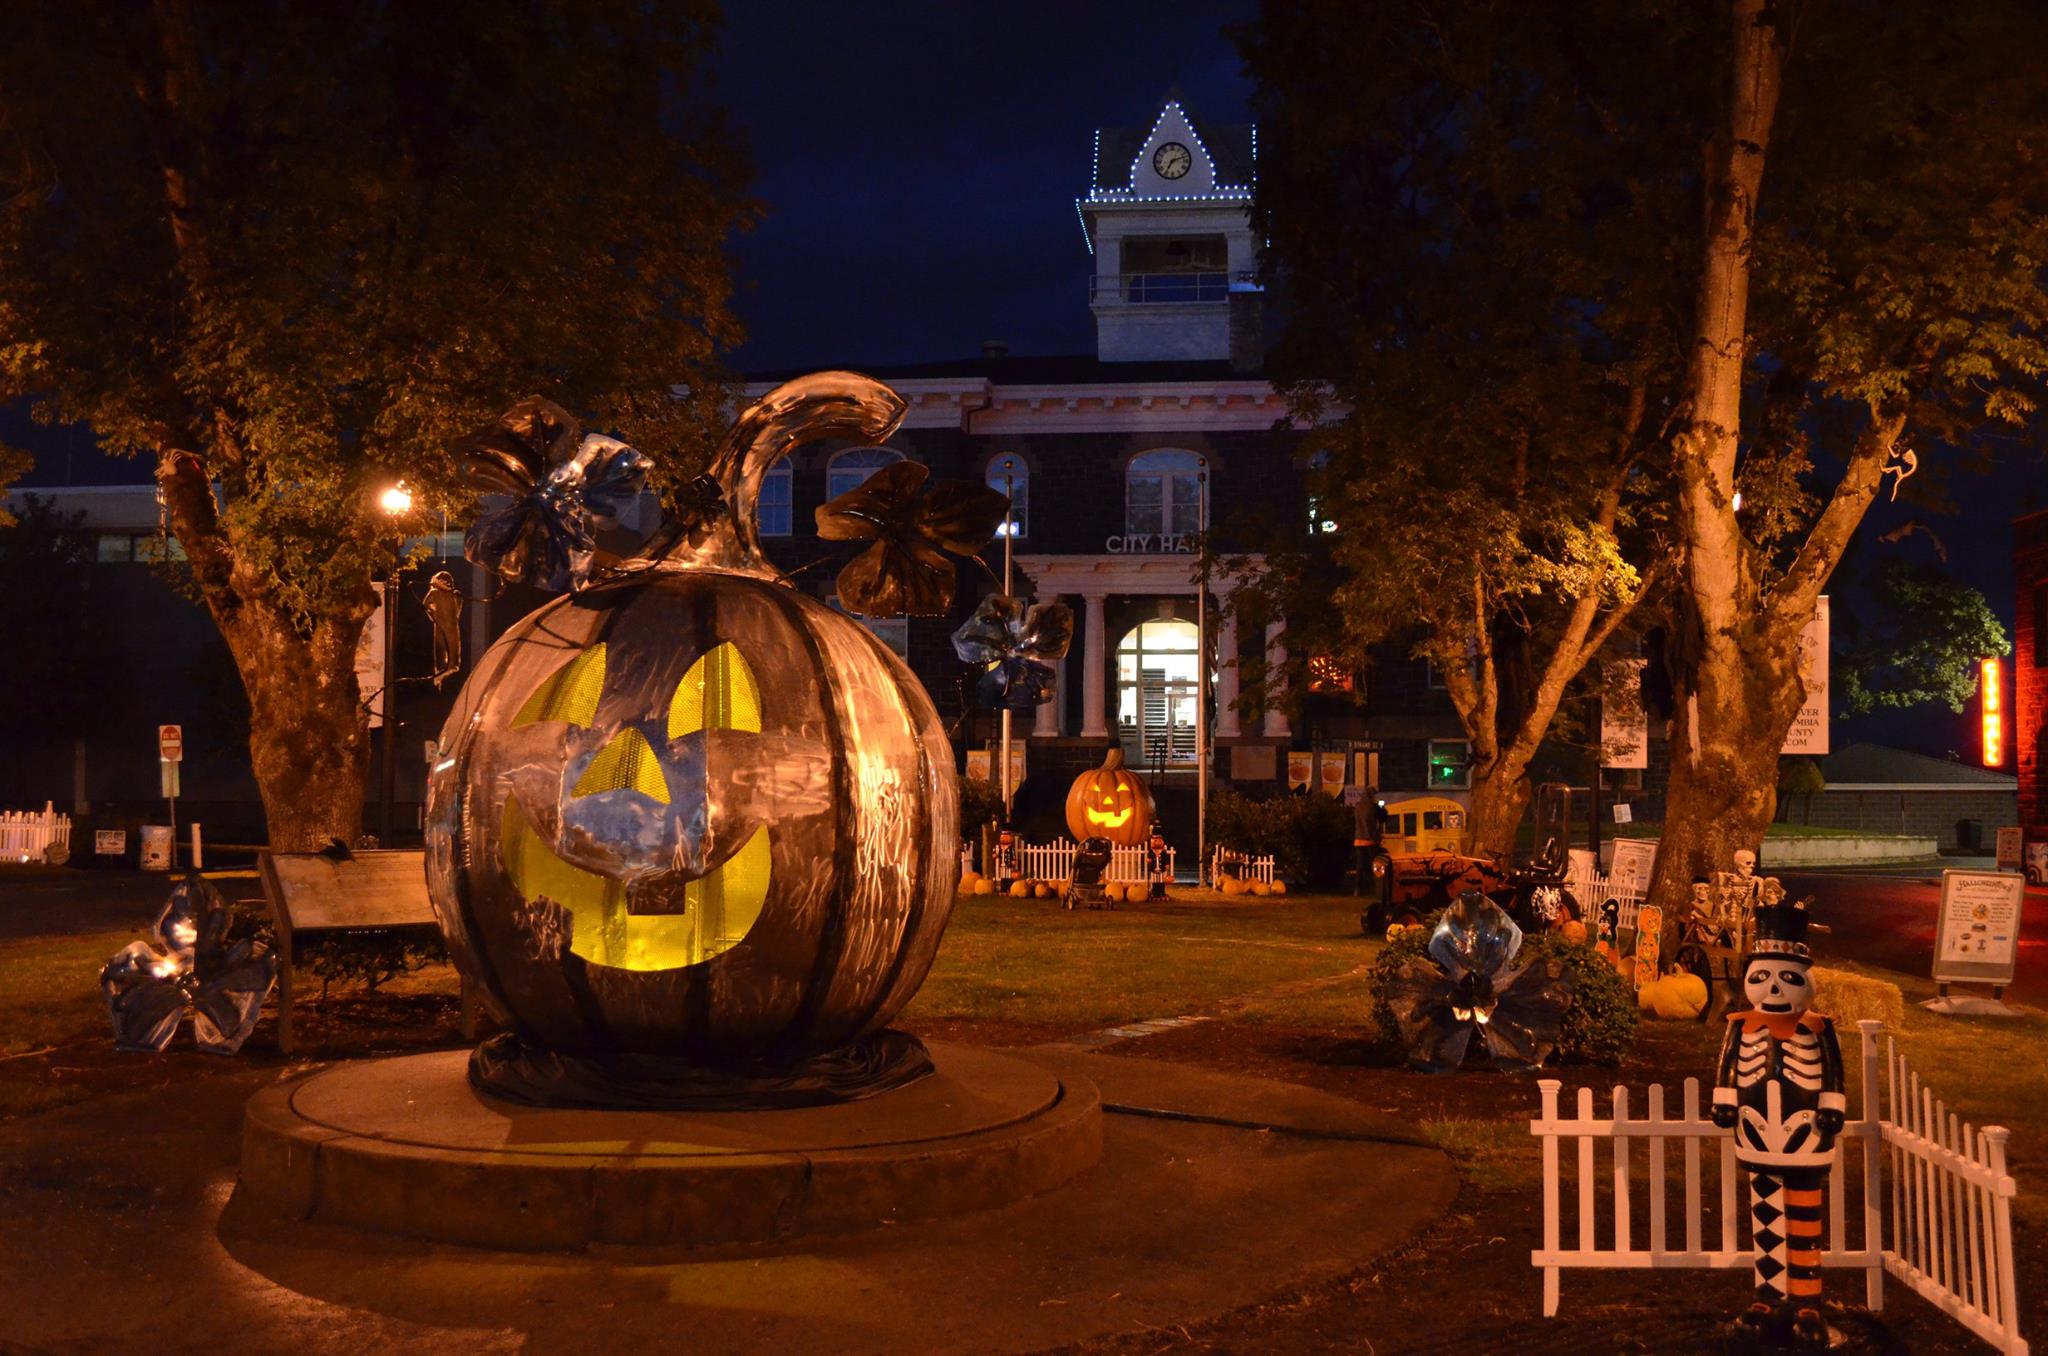 Every October, St. Helens, Oregon, Becomes A Spooky Halloween Town